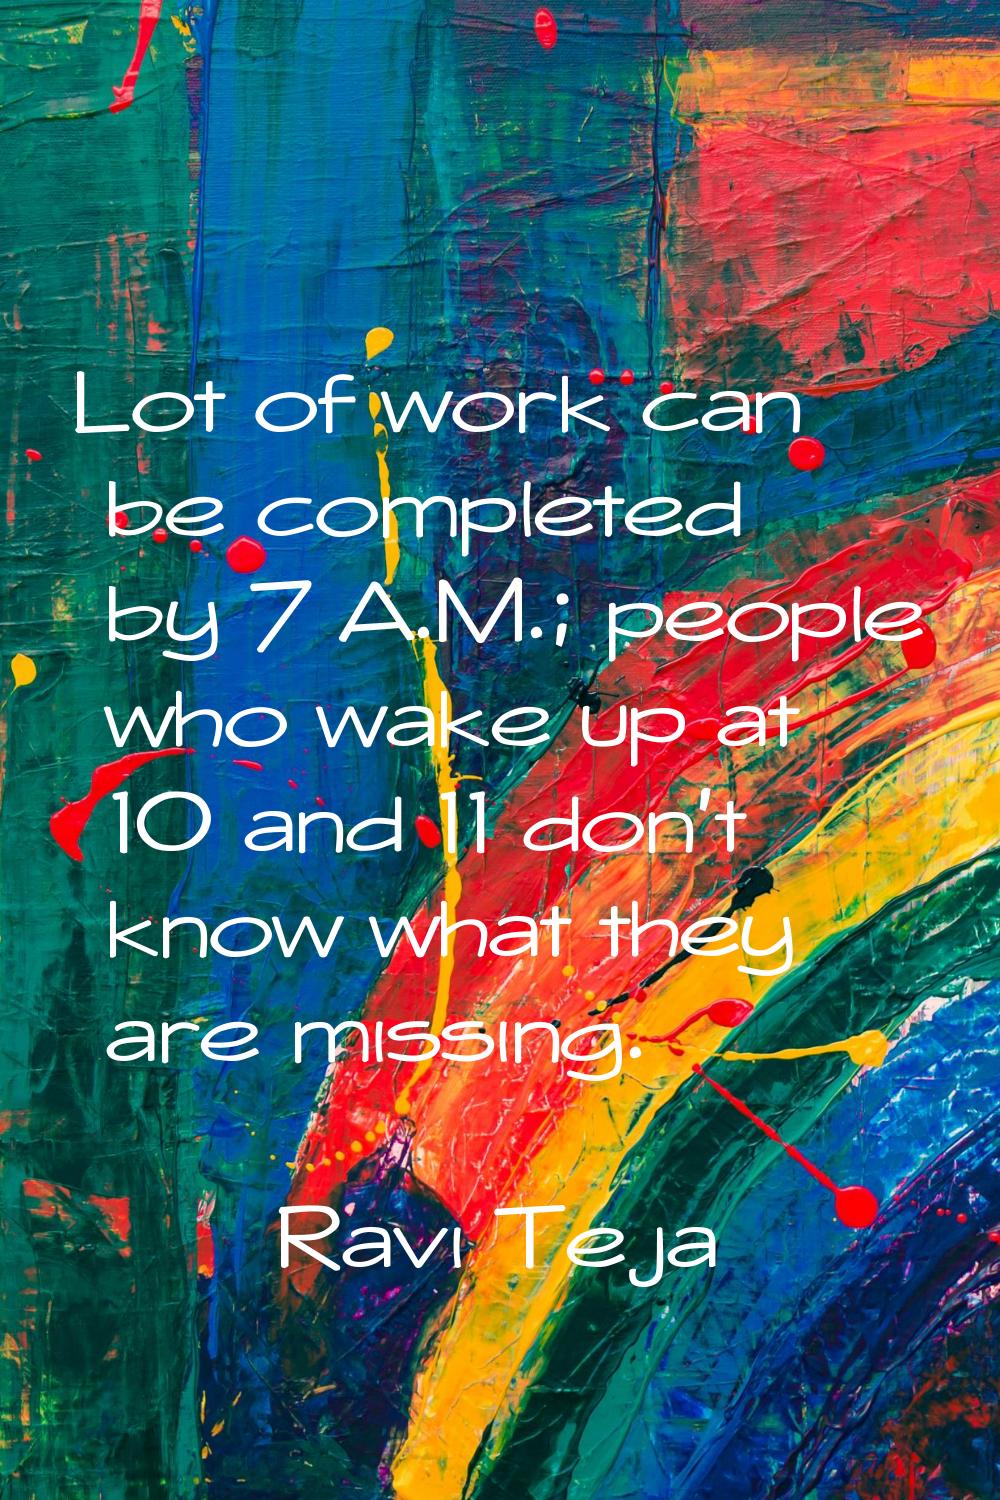 Lot of work can be completed by 7 A.M.; people who wake up at 10 and 11 don't know what they are mi